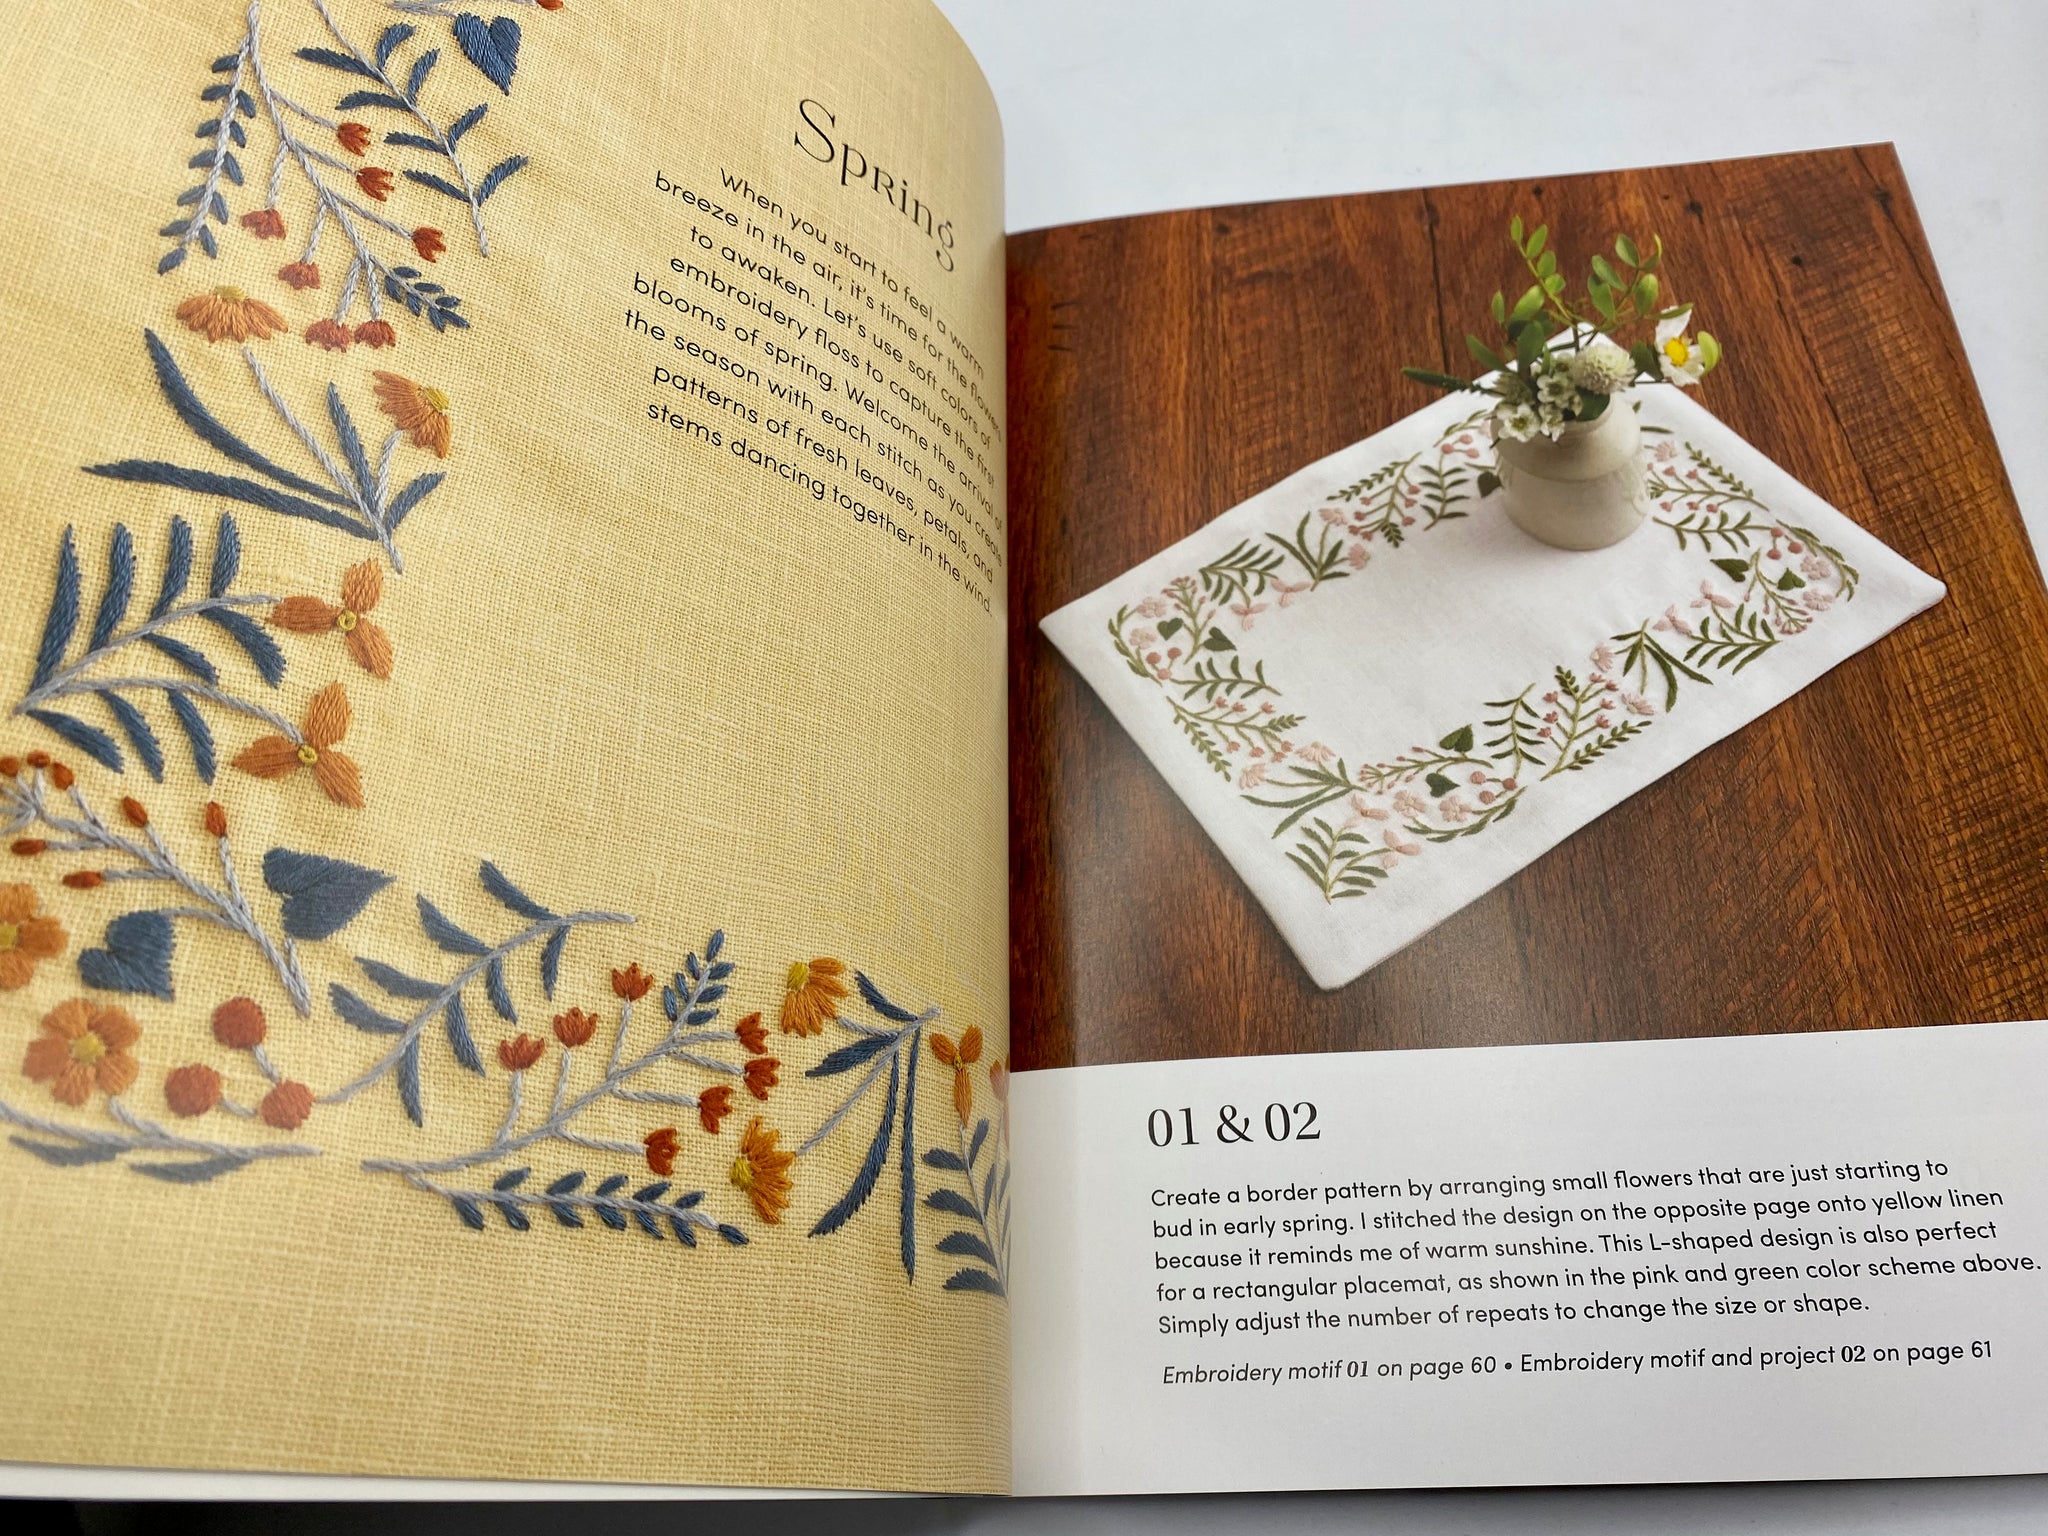 Beautiful Botanical Embroidery Book by Alice Makabe - A Threaded